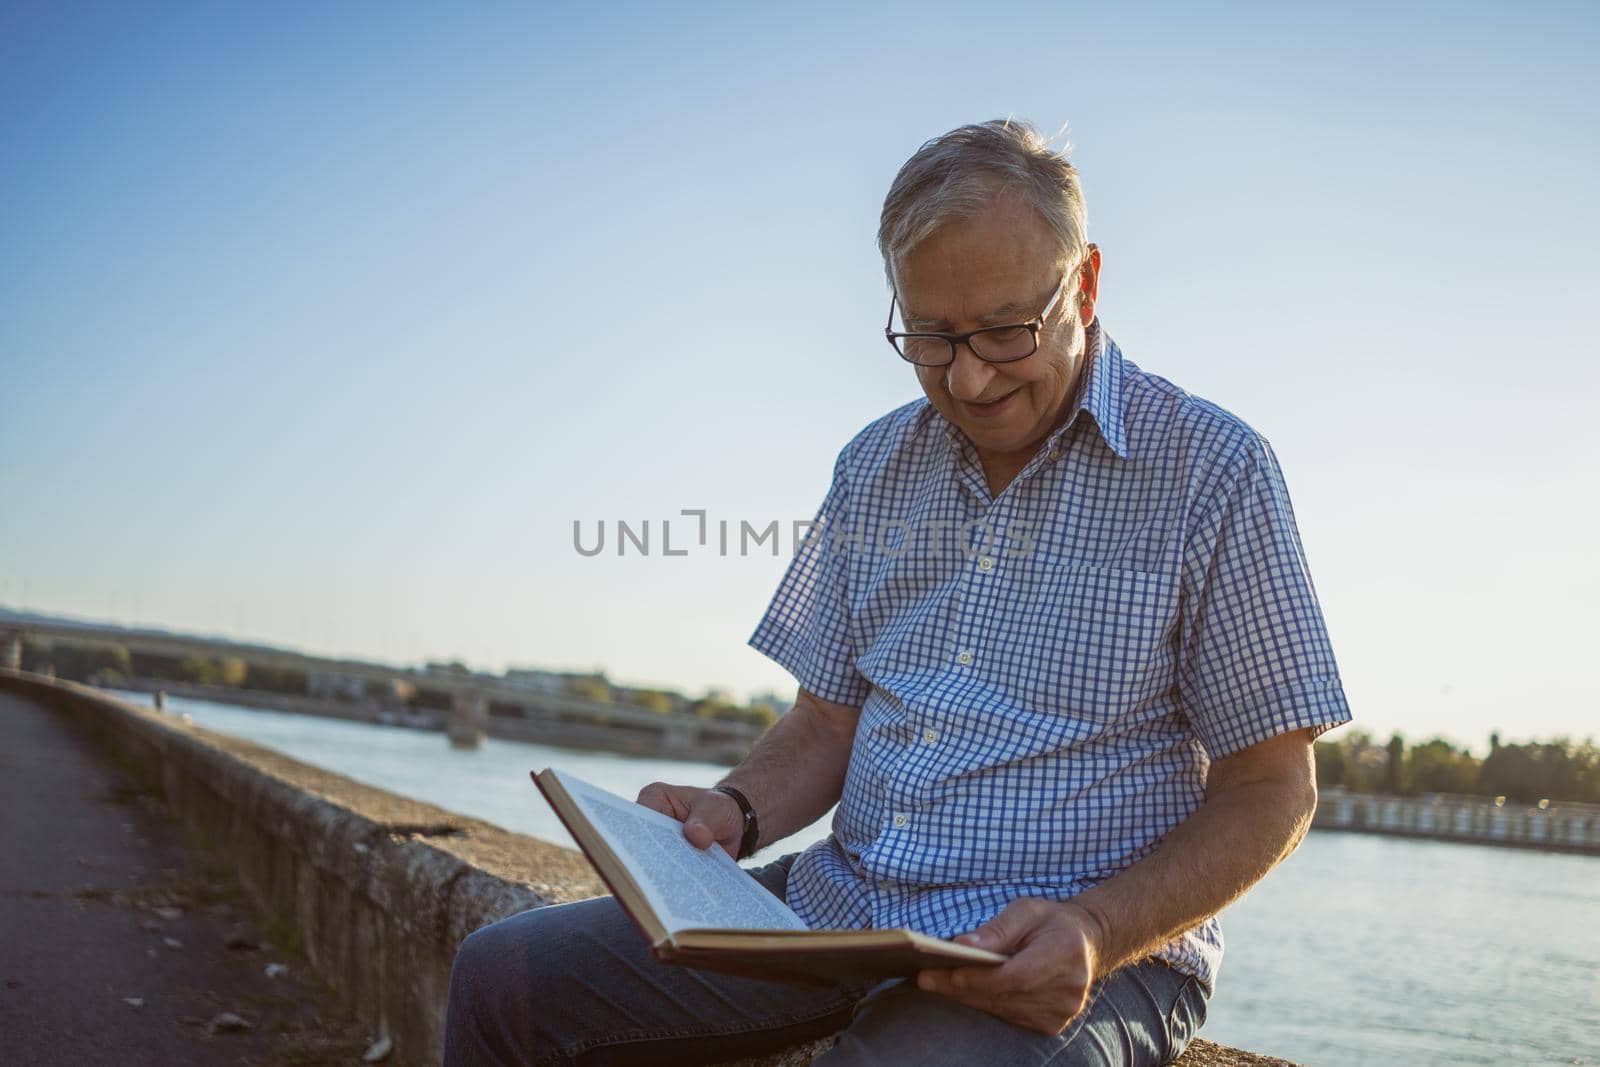 Outdoor portrait of senior man who is reading book.